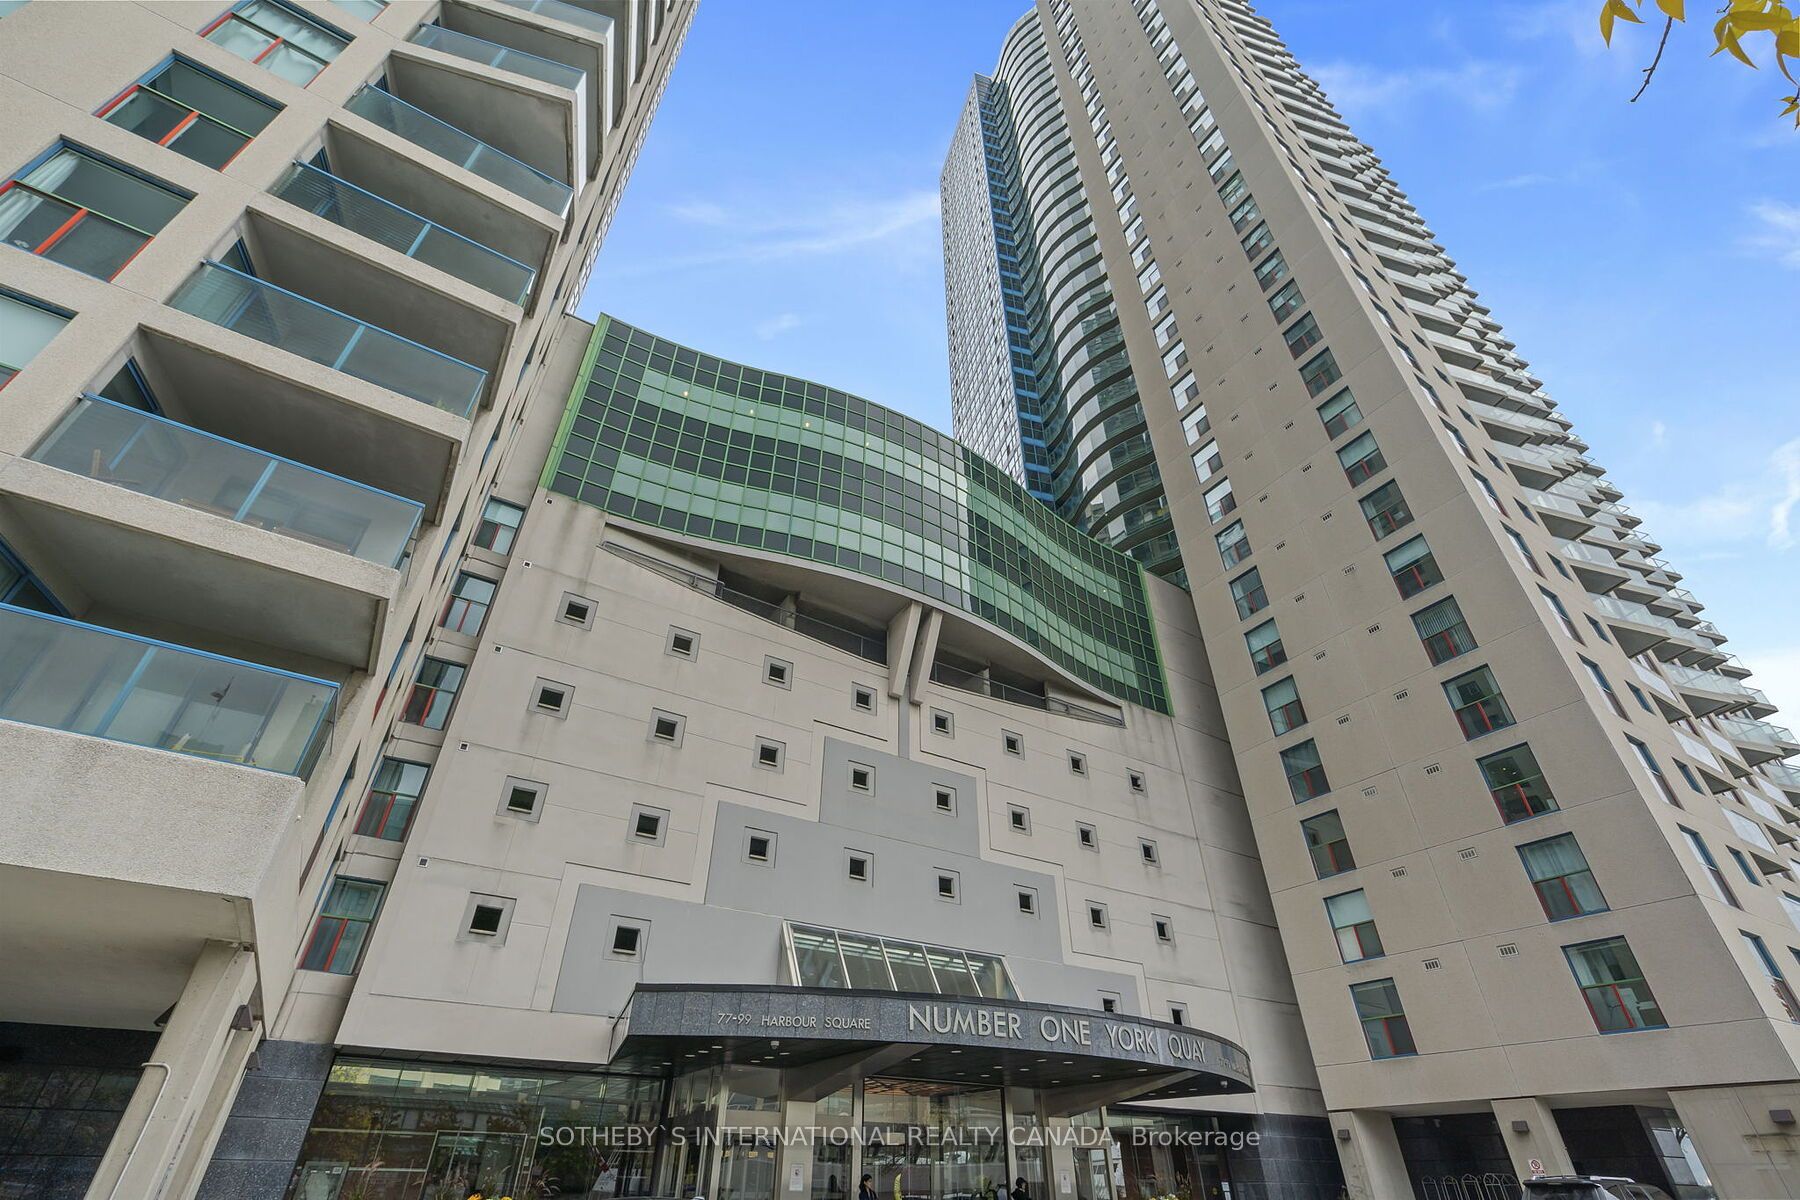 Condo Apt house for sale at 77 Harbour Sq Toronto Ontario